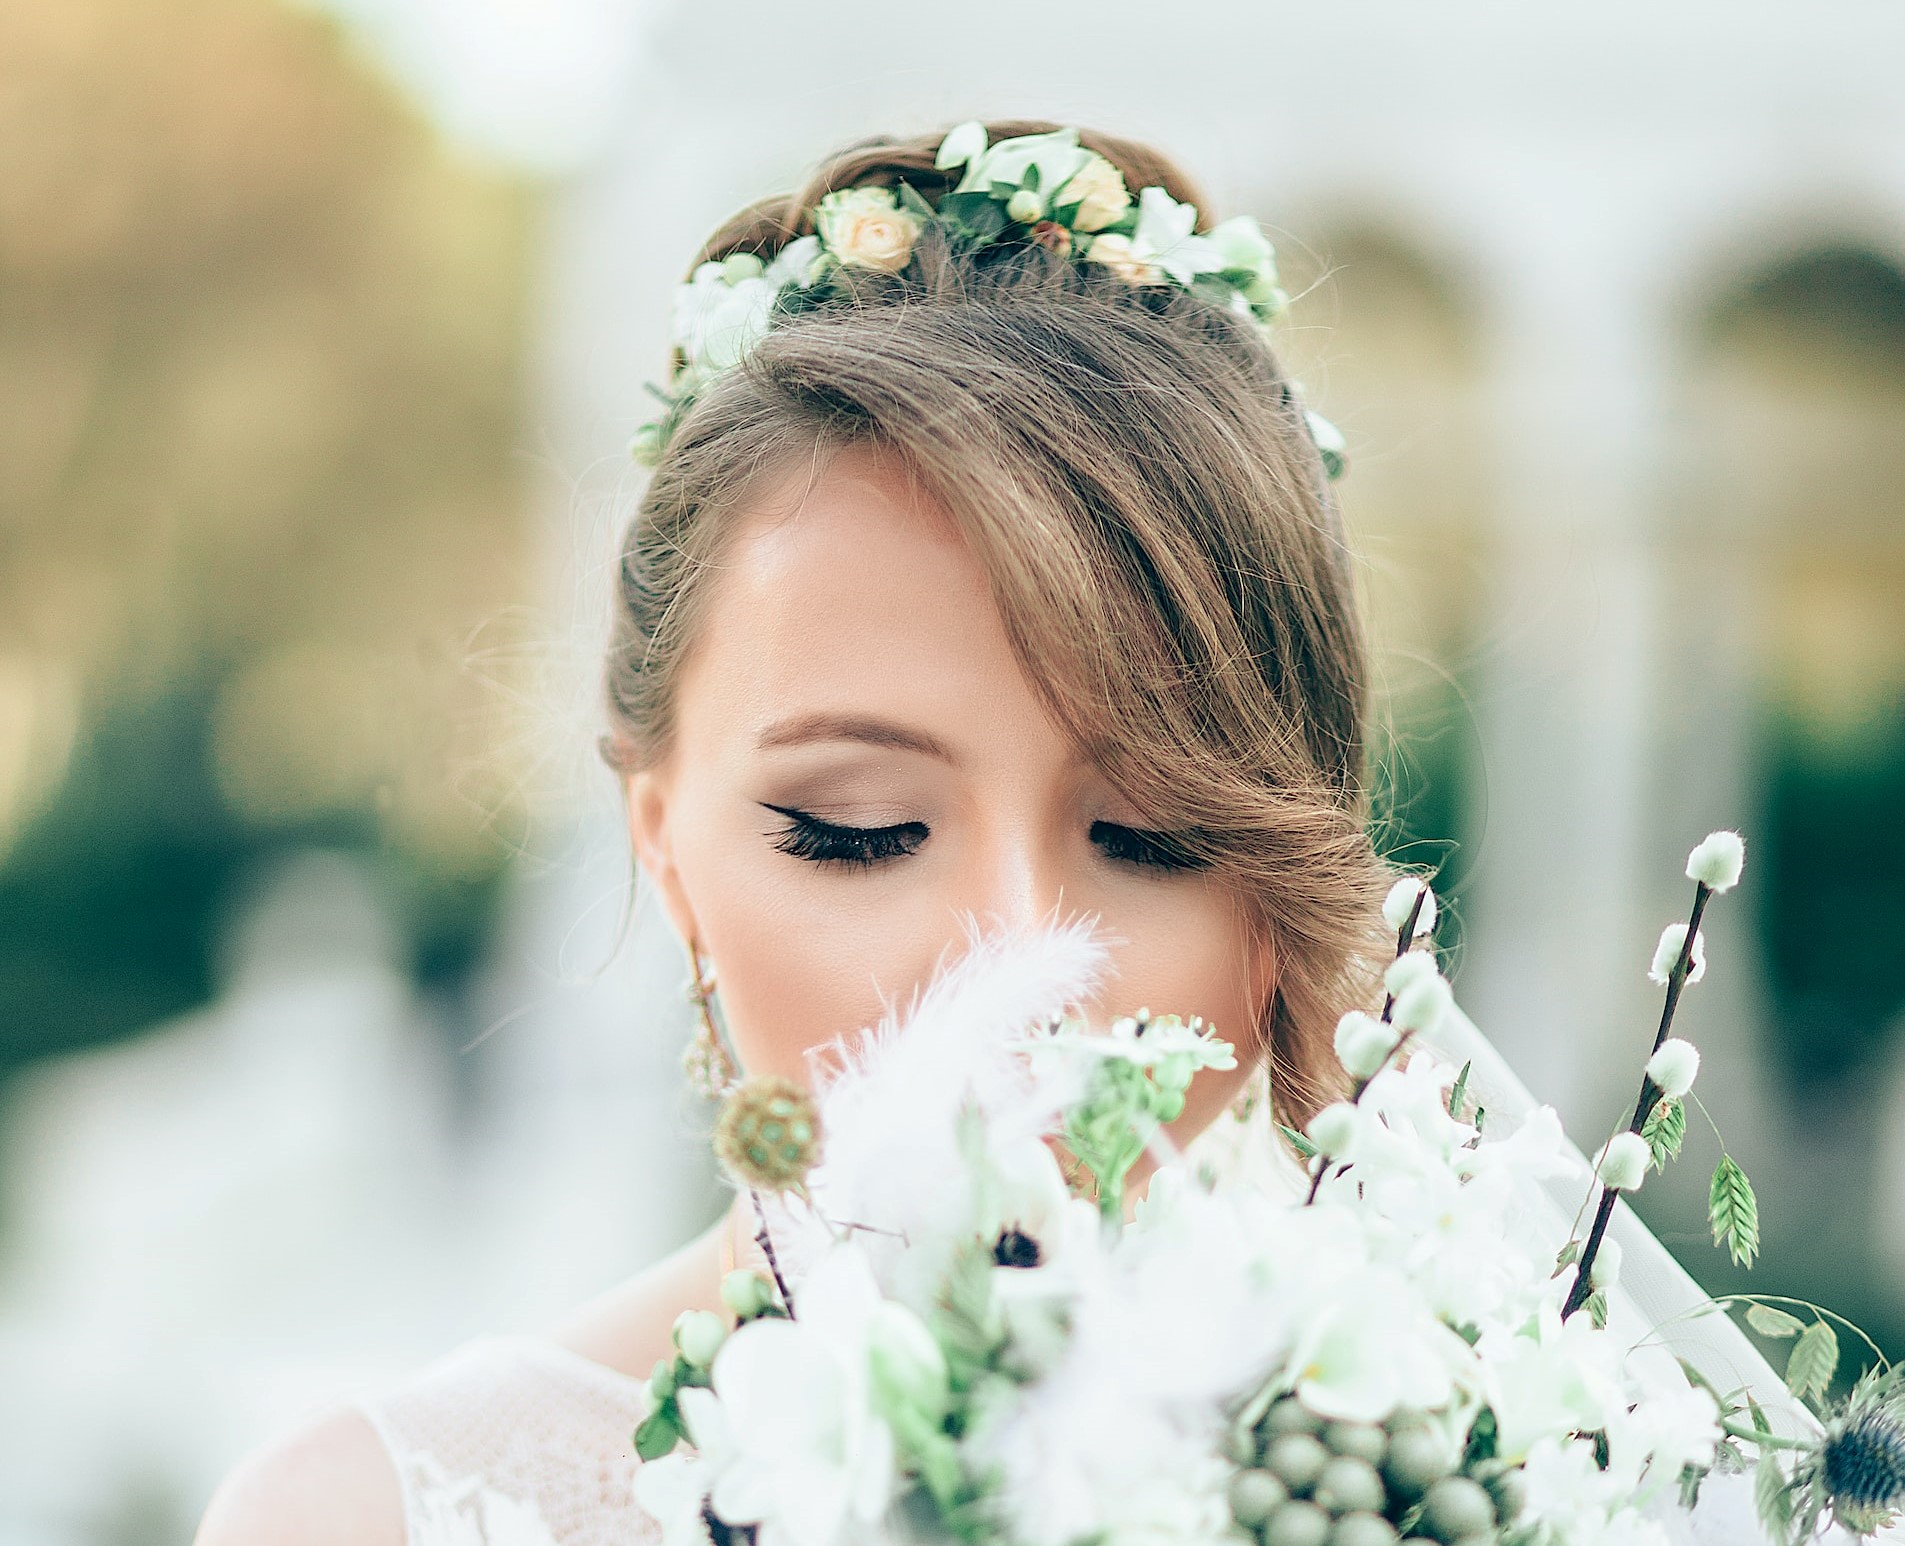 How to find the perfect wedding headpiece for your big day?